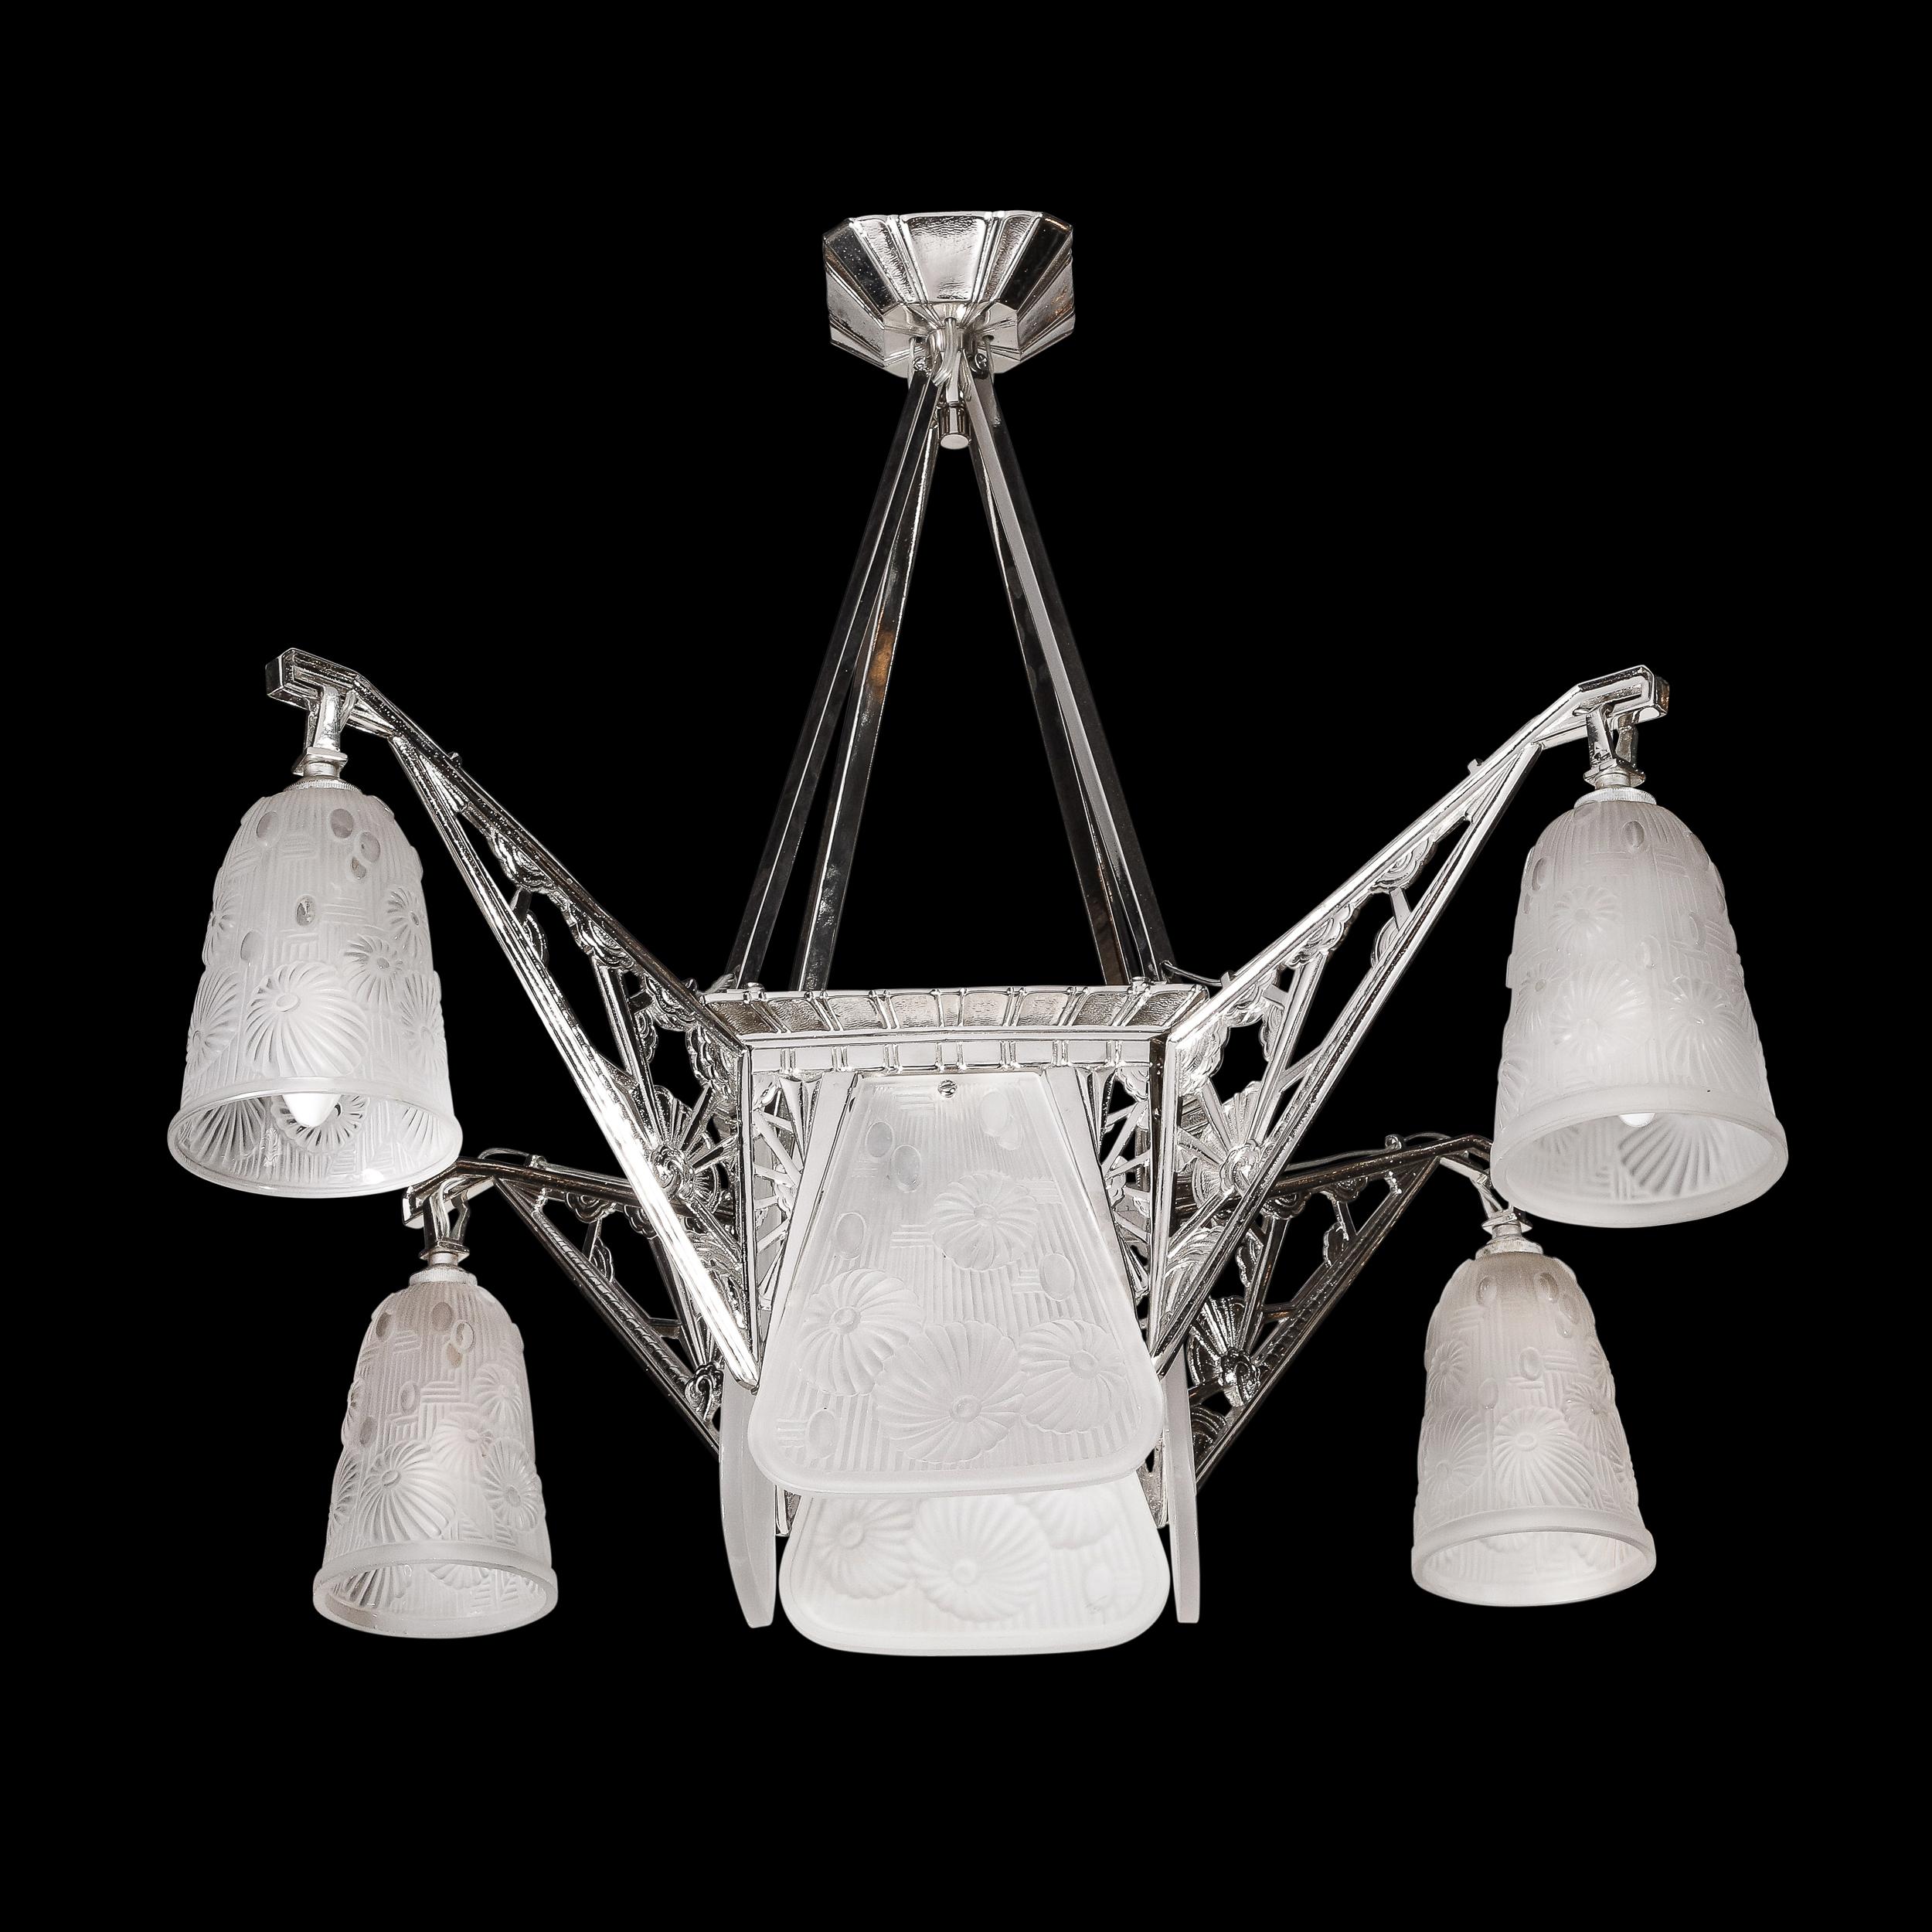 With graceful lines and geometric detailing, this spectacular chandelier is a stunning example of the Art Deco style. Designed by renowned glassmaker Daum in Nancy, France circa 1930, this light fixture features four frosted panels of glass